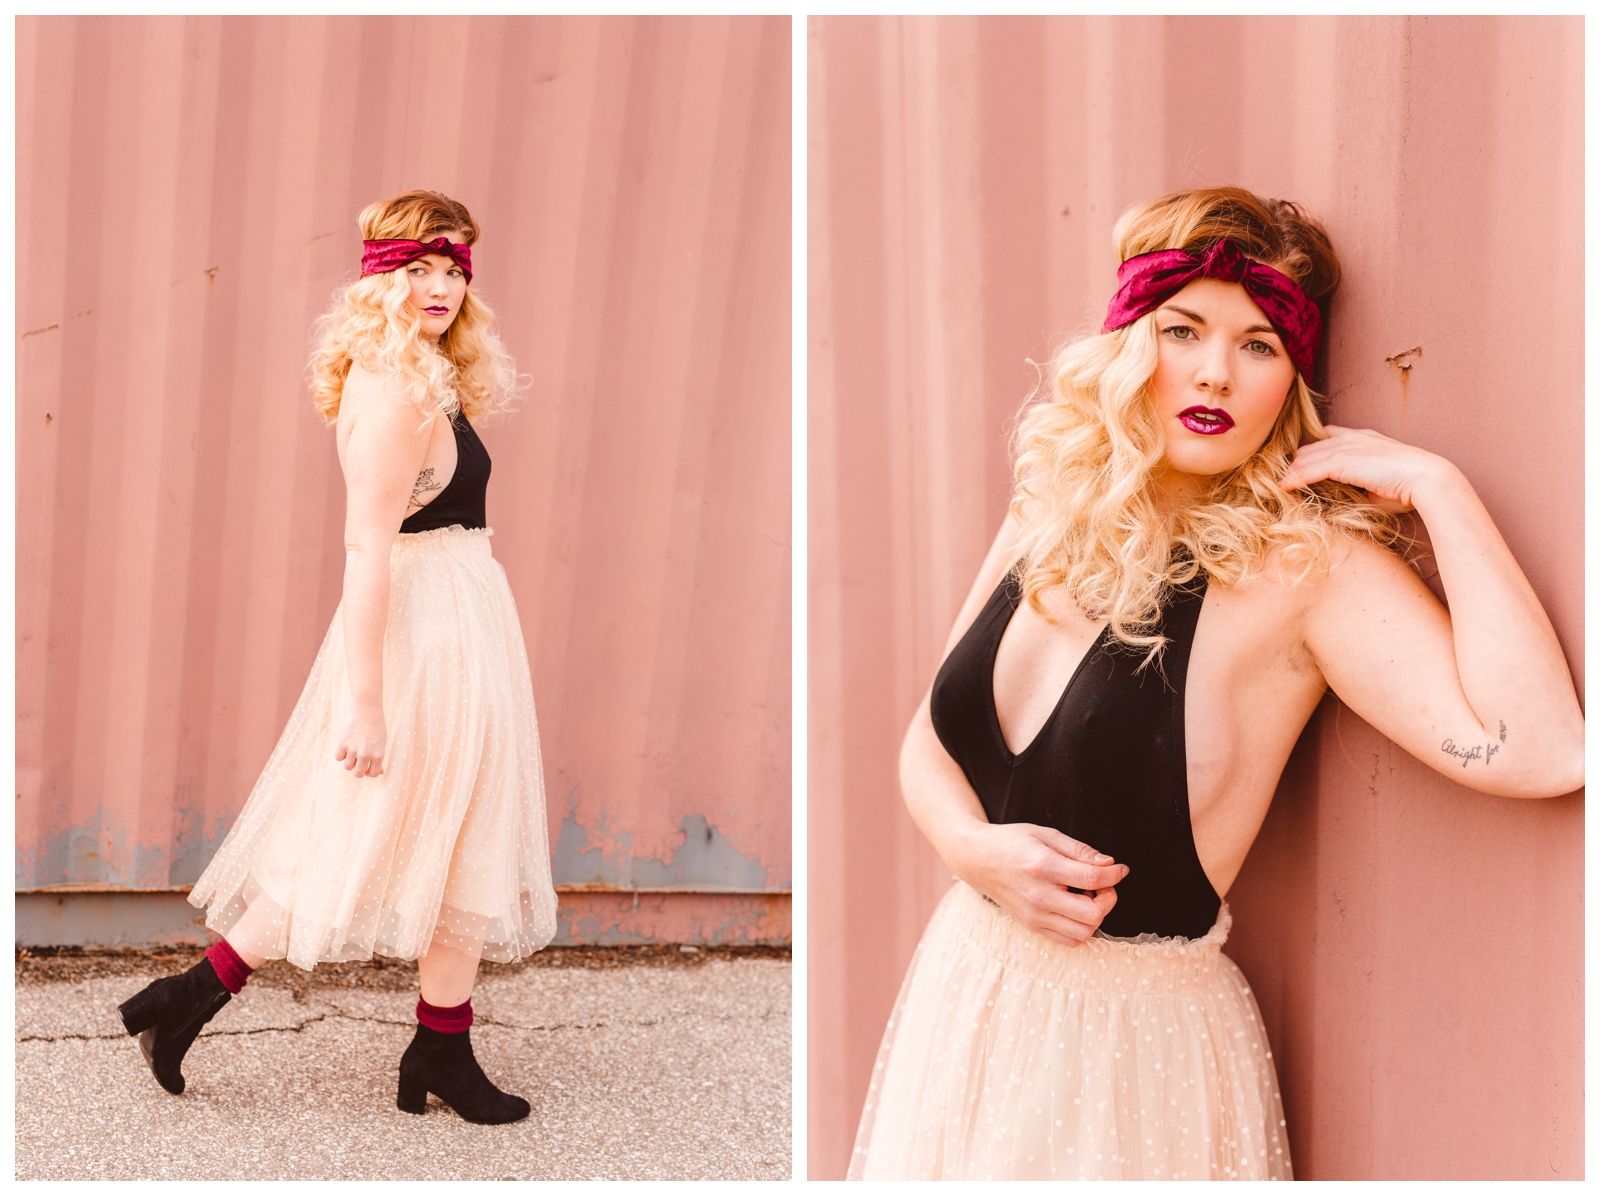 Valentines or Galentines Day Photo Shoot Inspiration - Brooke Michelle Photography